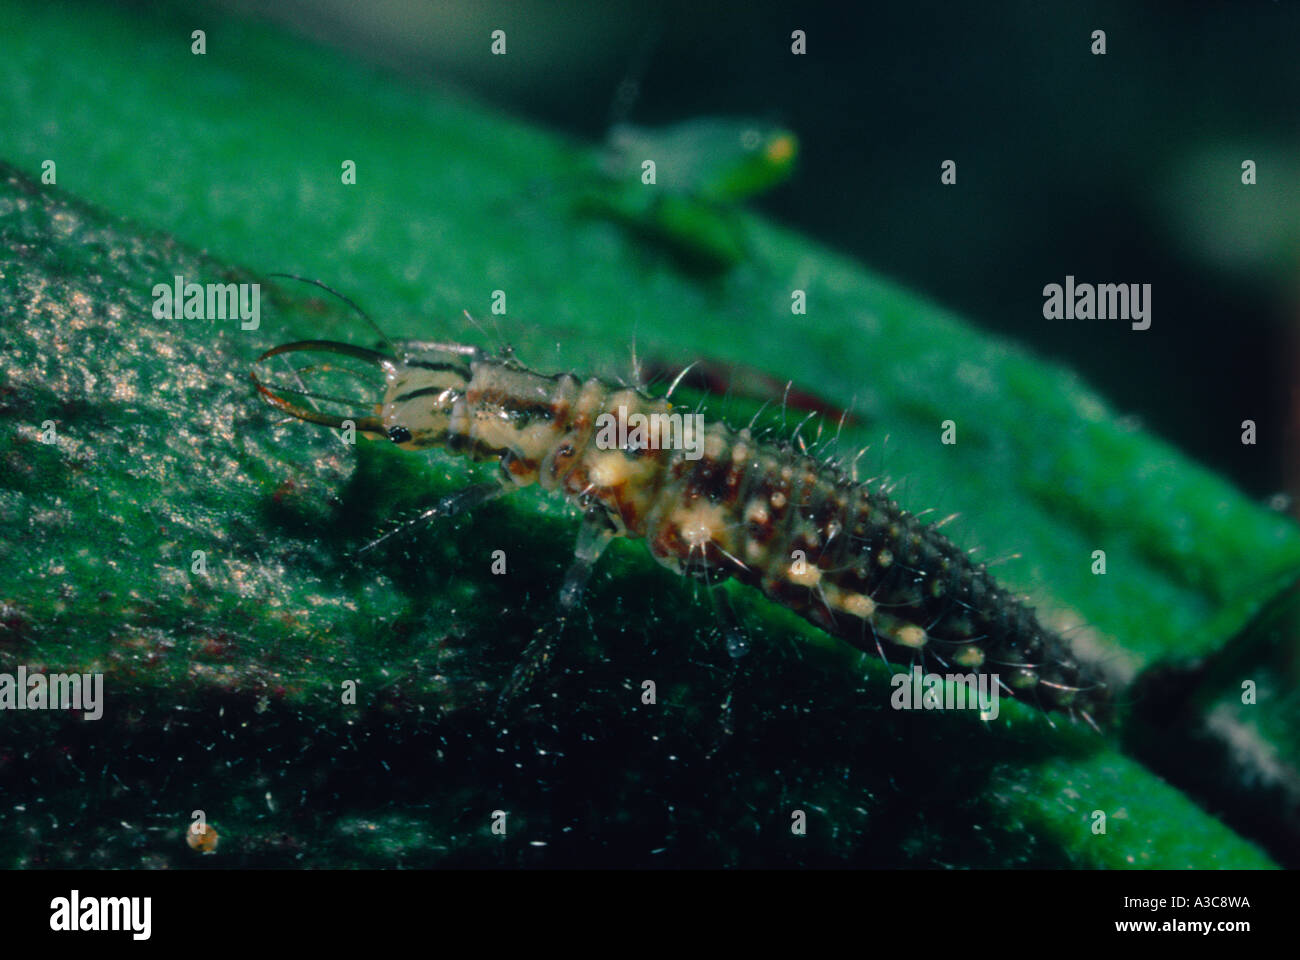 Green Lacewing, Family Chrysopidae. Larva on leaf Stock Photo